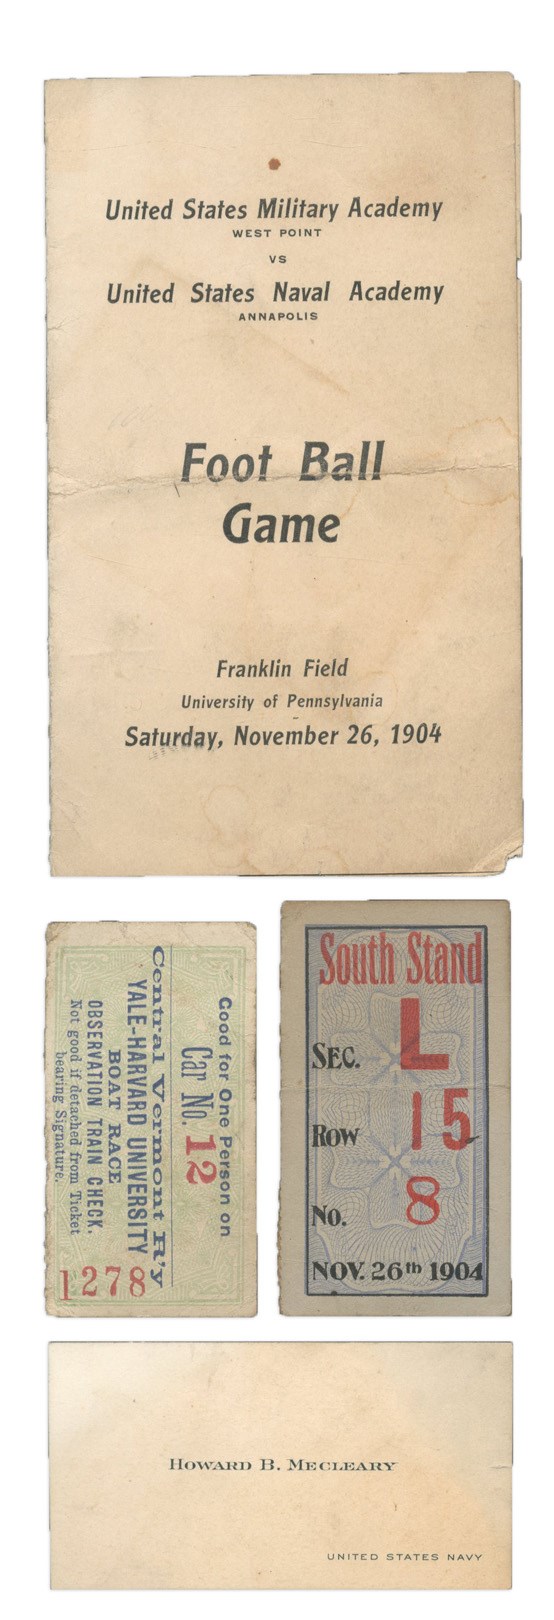 - 1904 Army vs. Navy Foot Ball Game Program and Ticket